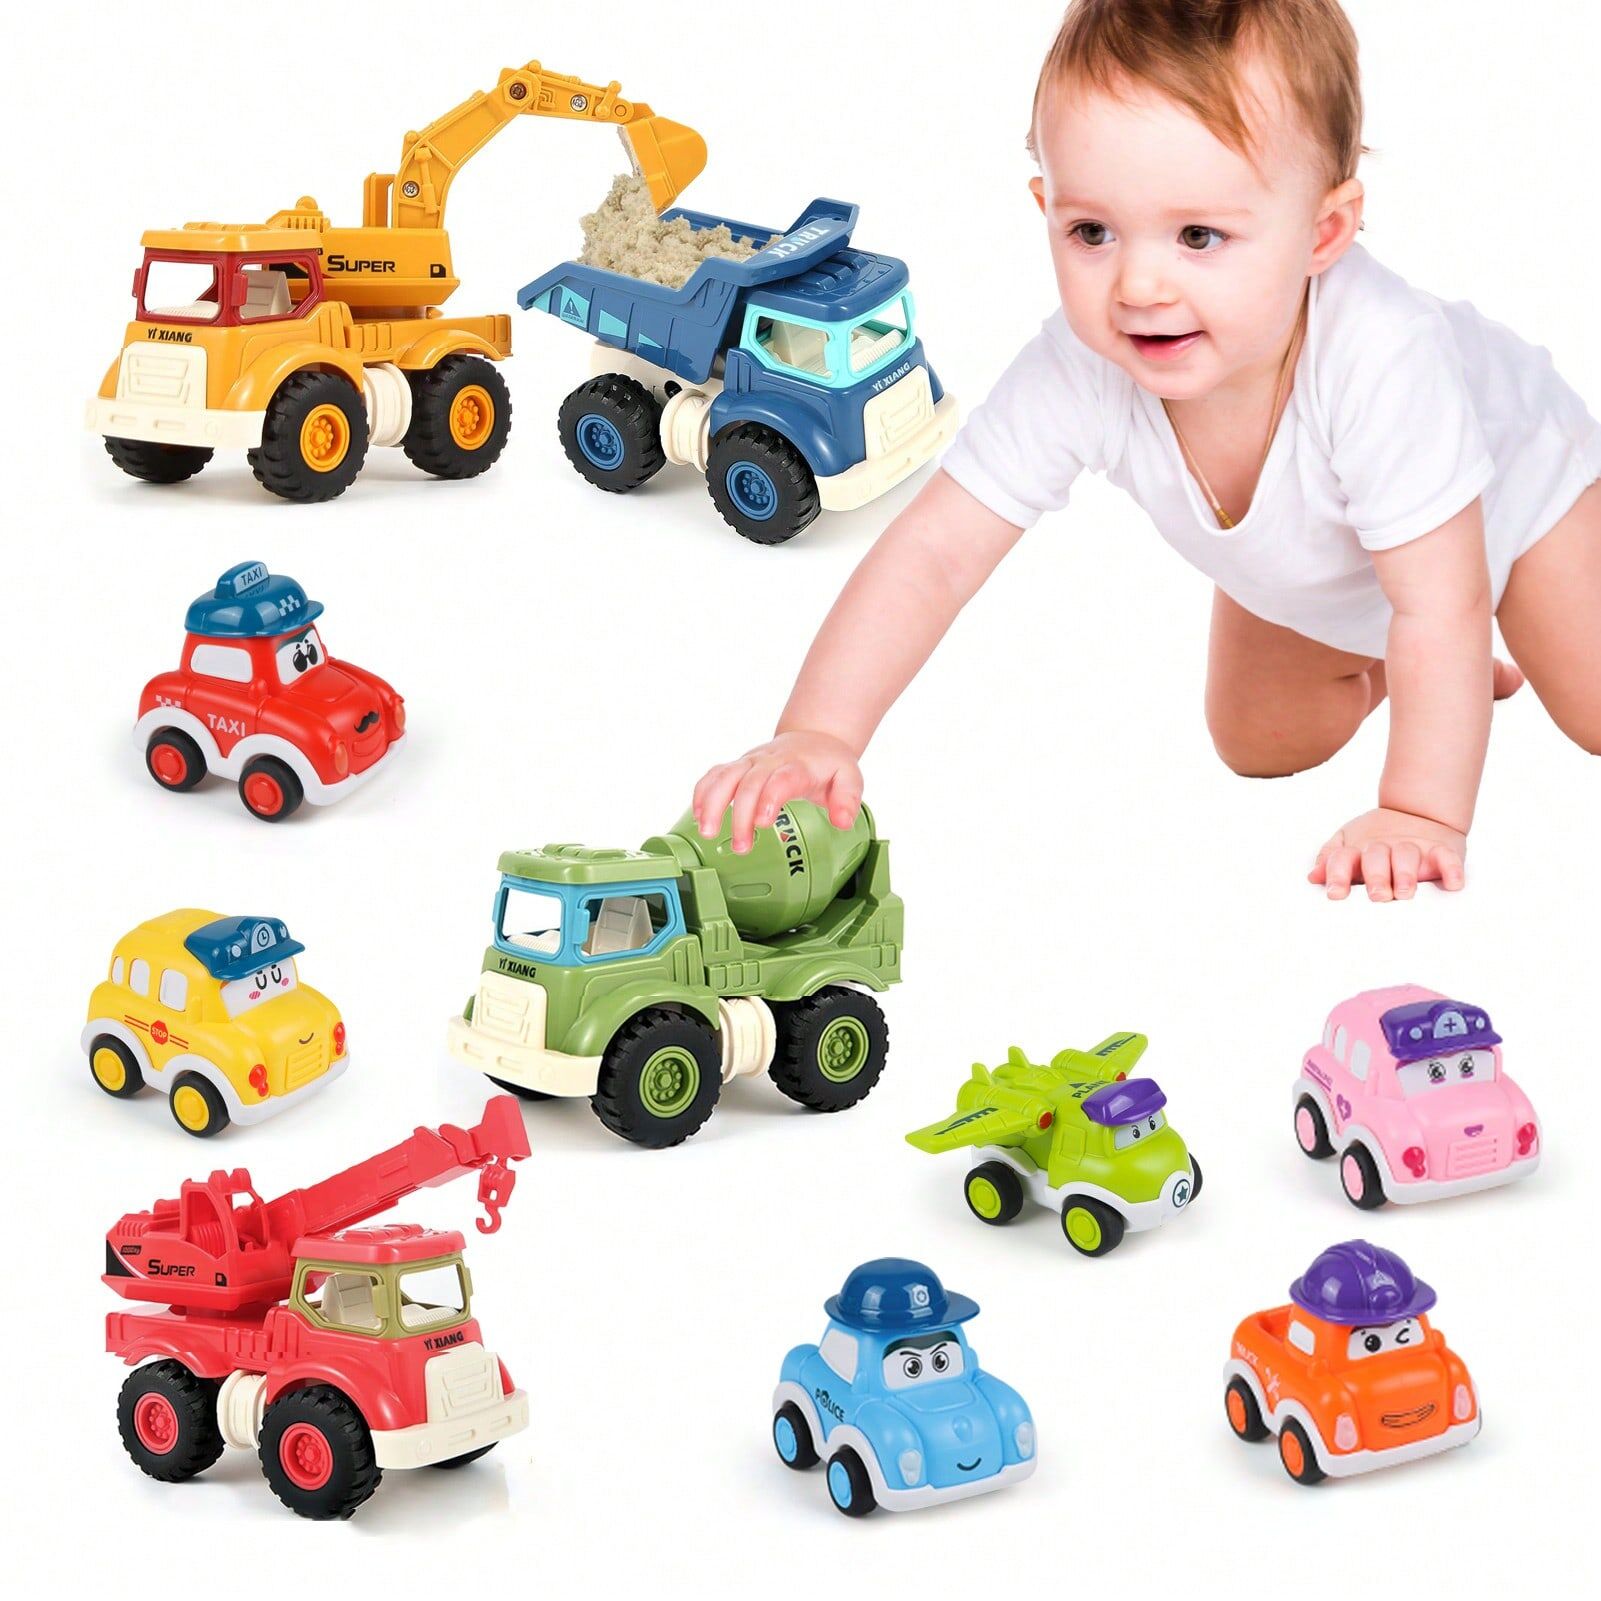 SHEIN Construction Toys Cars For 2 3 4 5 6+ Years Old Boys Girls Kids Toddlers, Sandbox Excavator Toy Construction Truck Toys Vehicles Dump Crane Cement Mixer Truck, Toys Cars Christmas Birthday Gifts Toys Multicolor 10PCS Cars